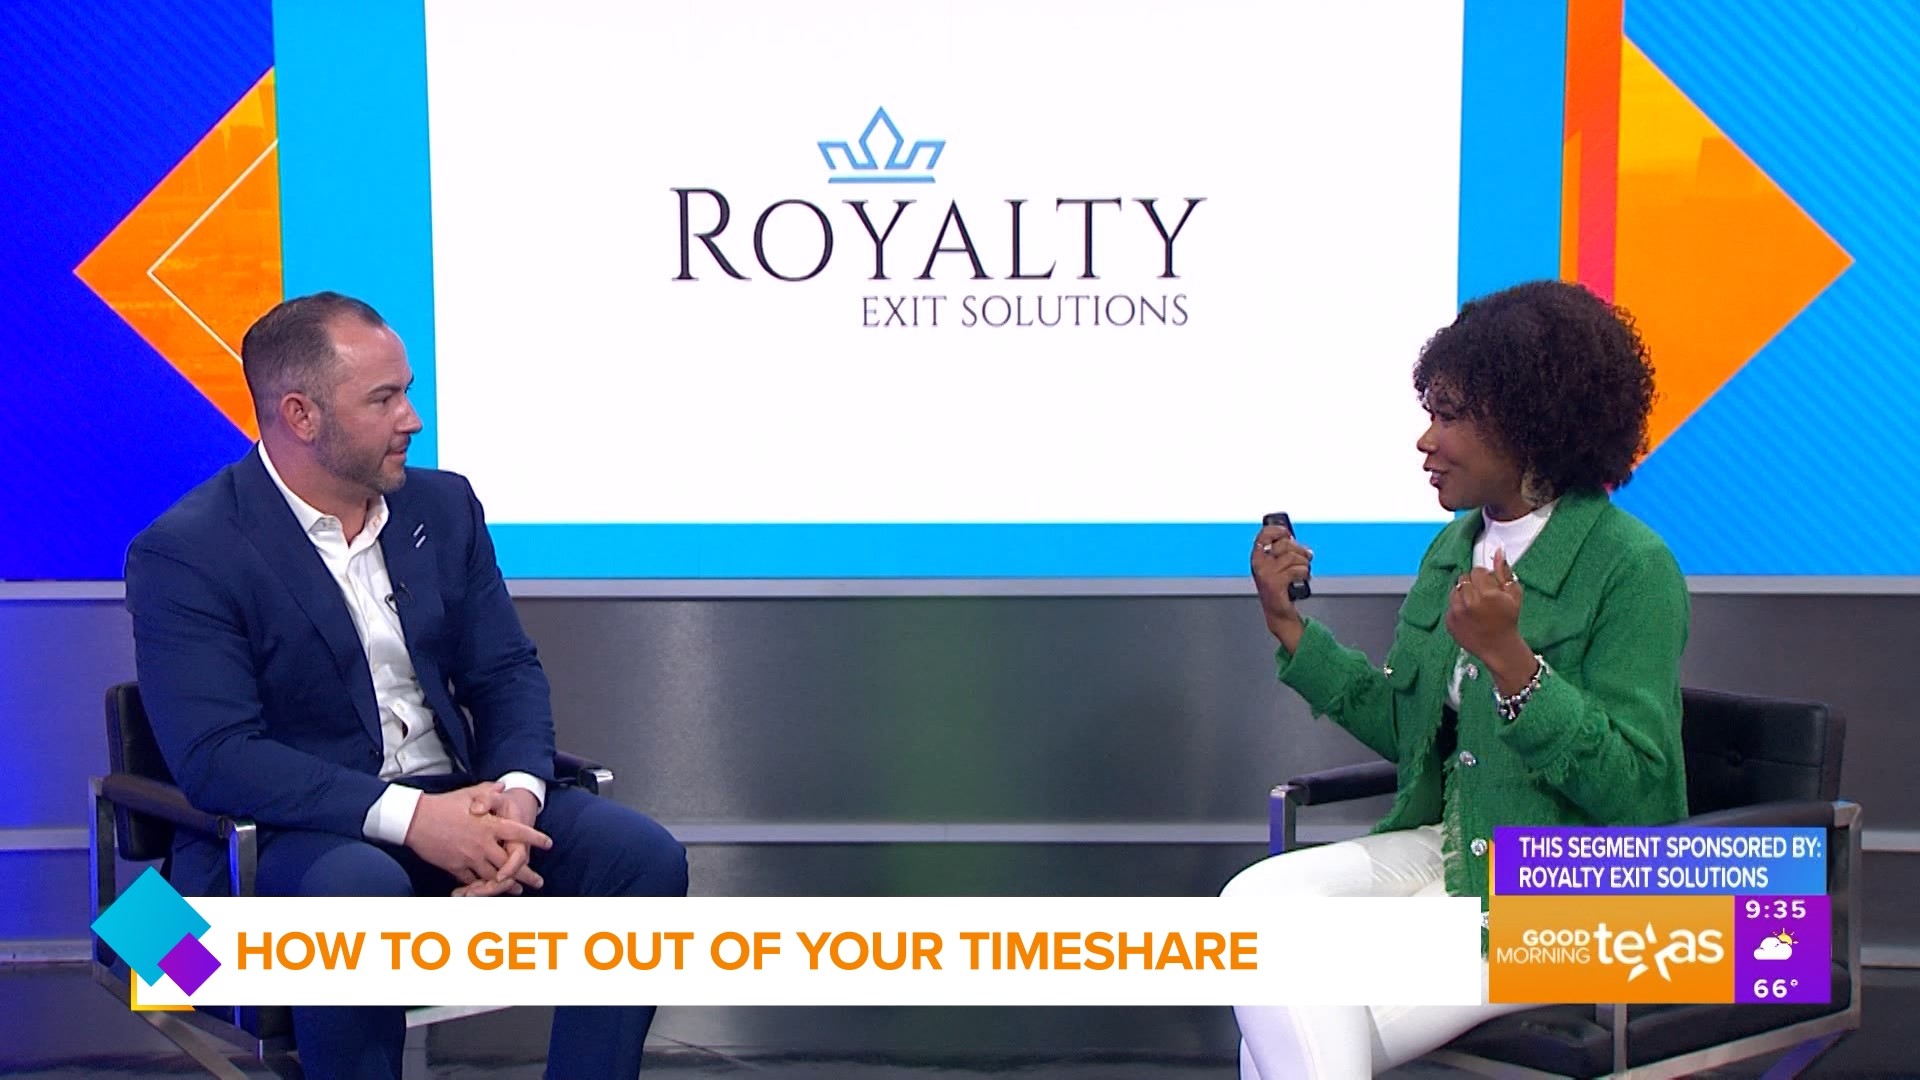 This segment is sponsored by Royalty Exit Solutions